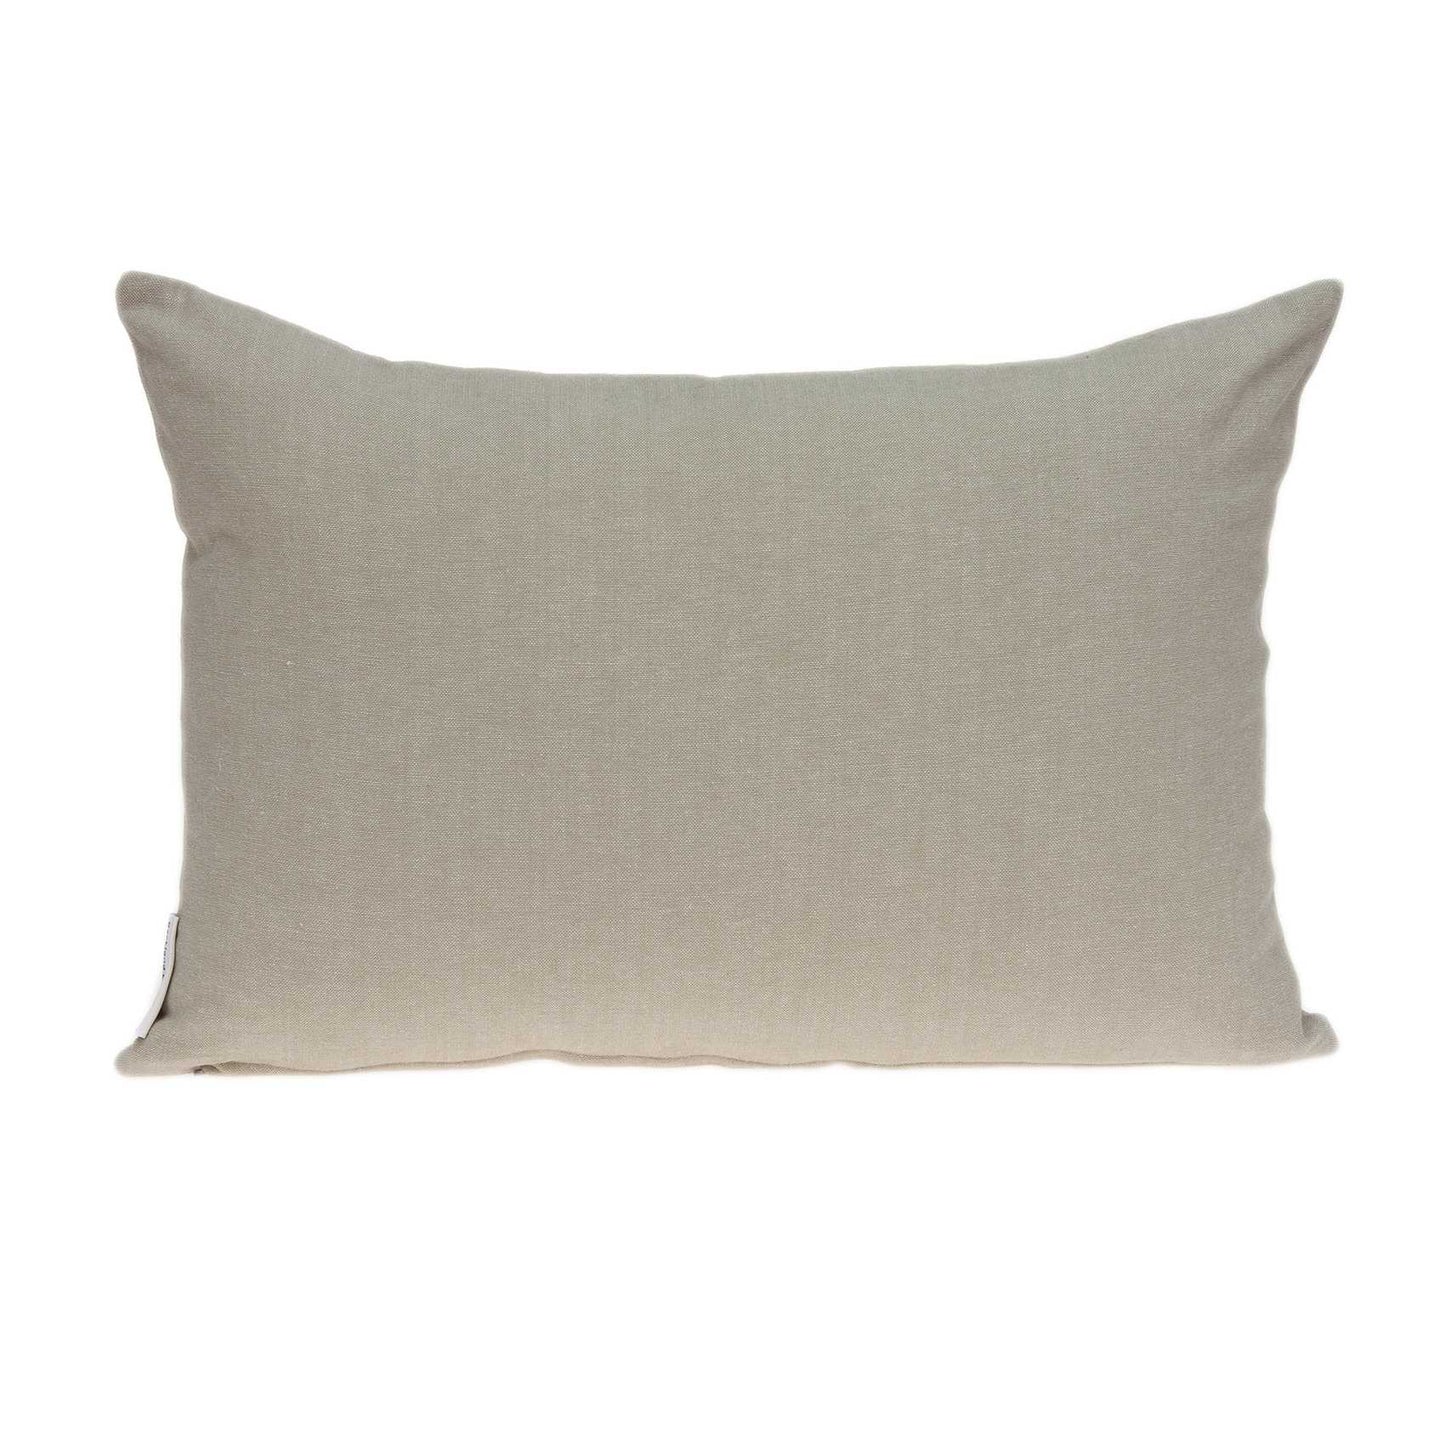 20" X 6" X 14" Traditional Beige Pillow With Poly Insert